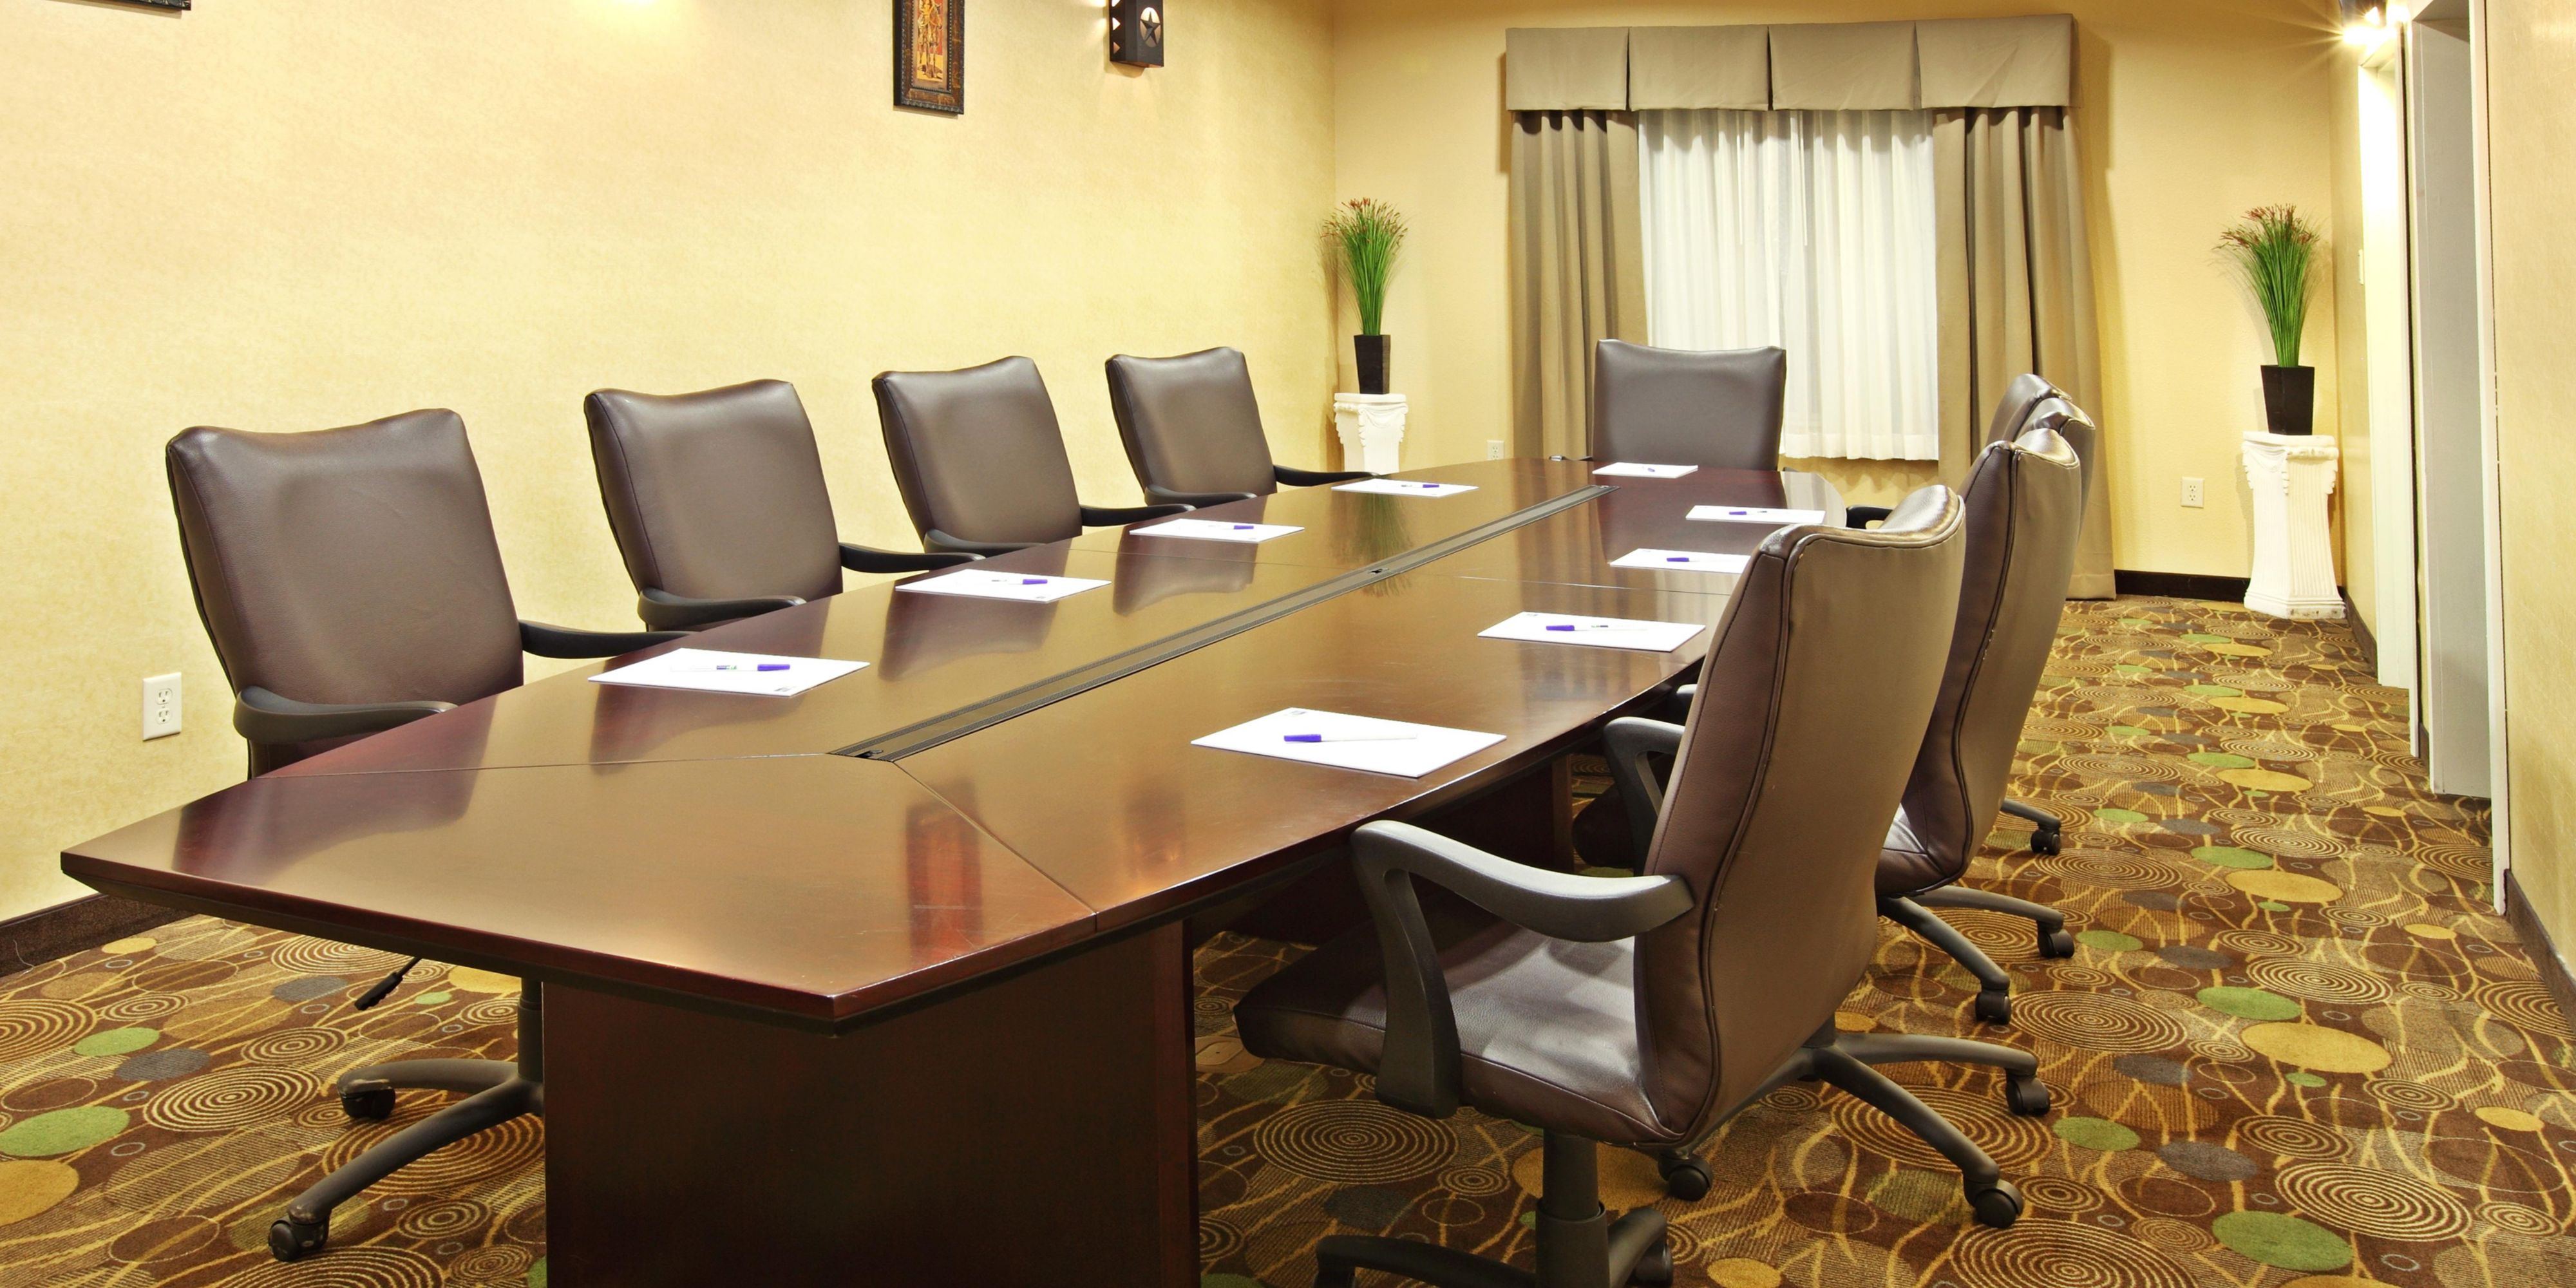 Need space for your smaller meetings? The Holiday Inn Express and Suites Marshall provides a meeting space that can hold up to 14 people.